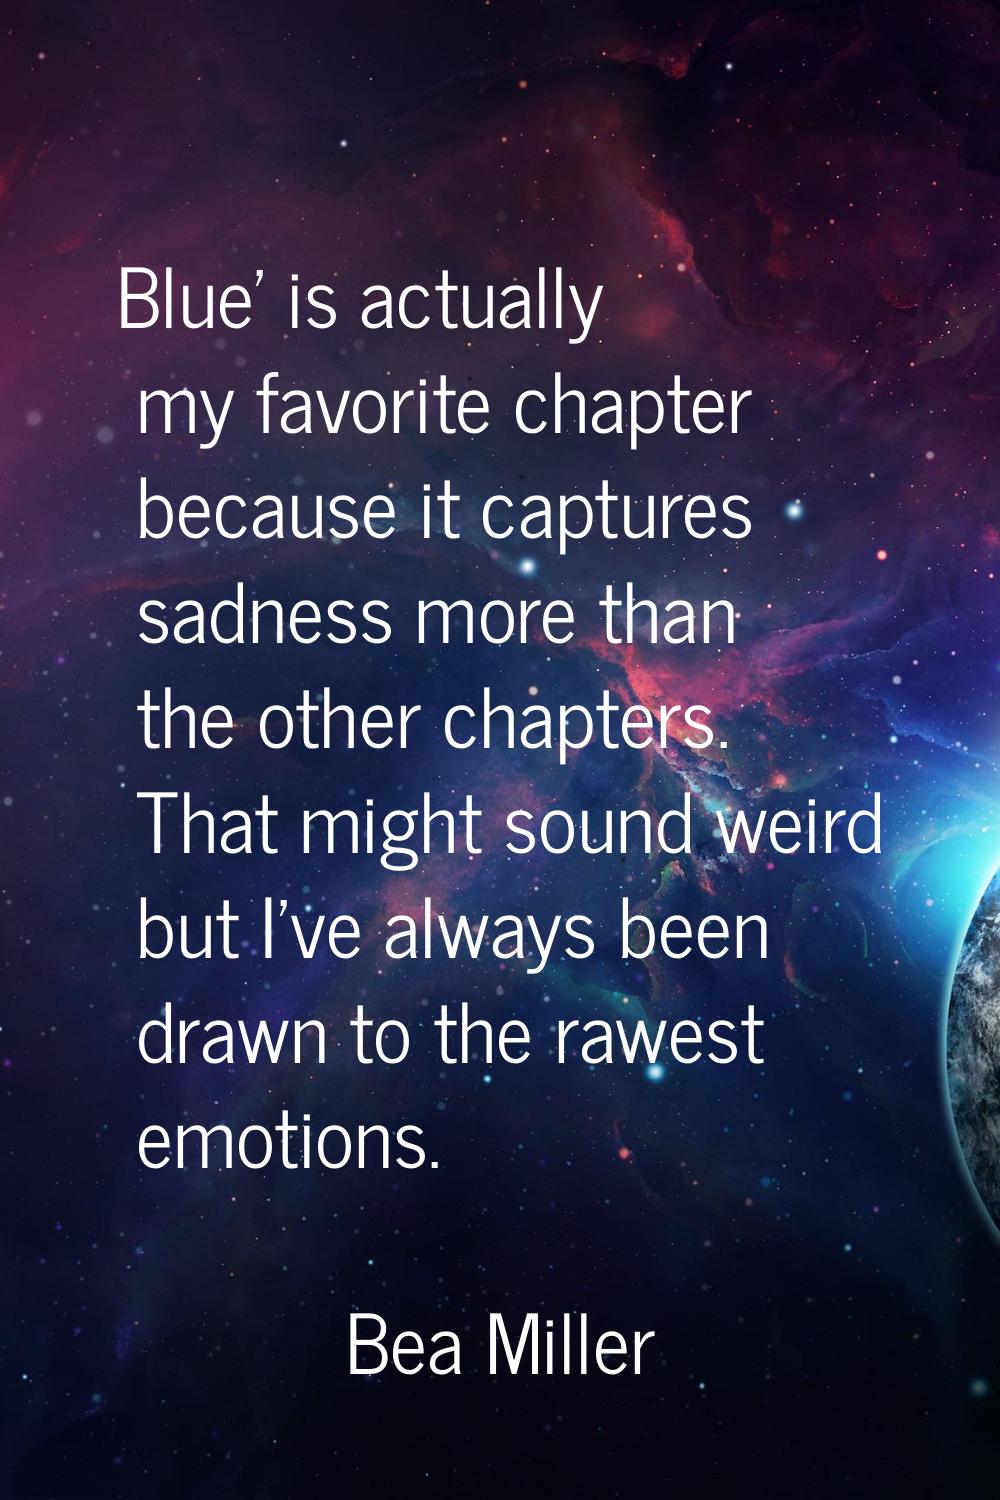 Blue' is actually my favorite chapter because it captures sadness more than the other chapters. Tha